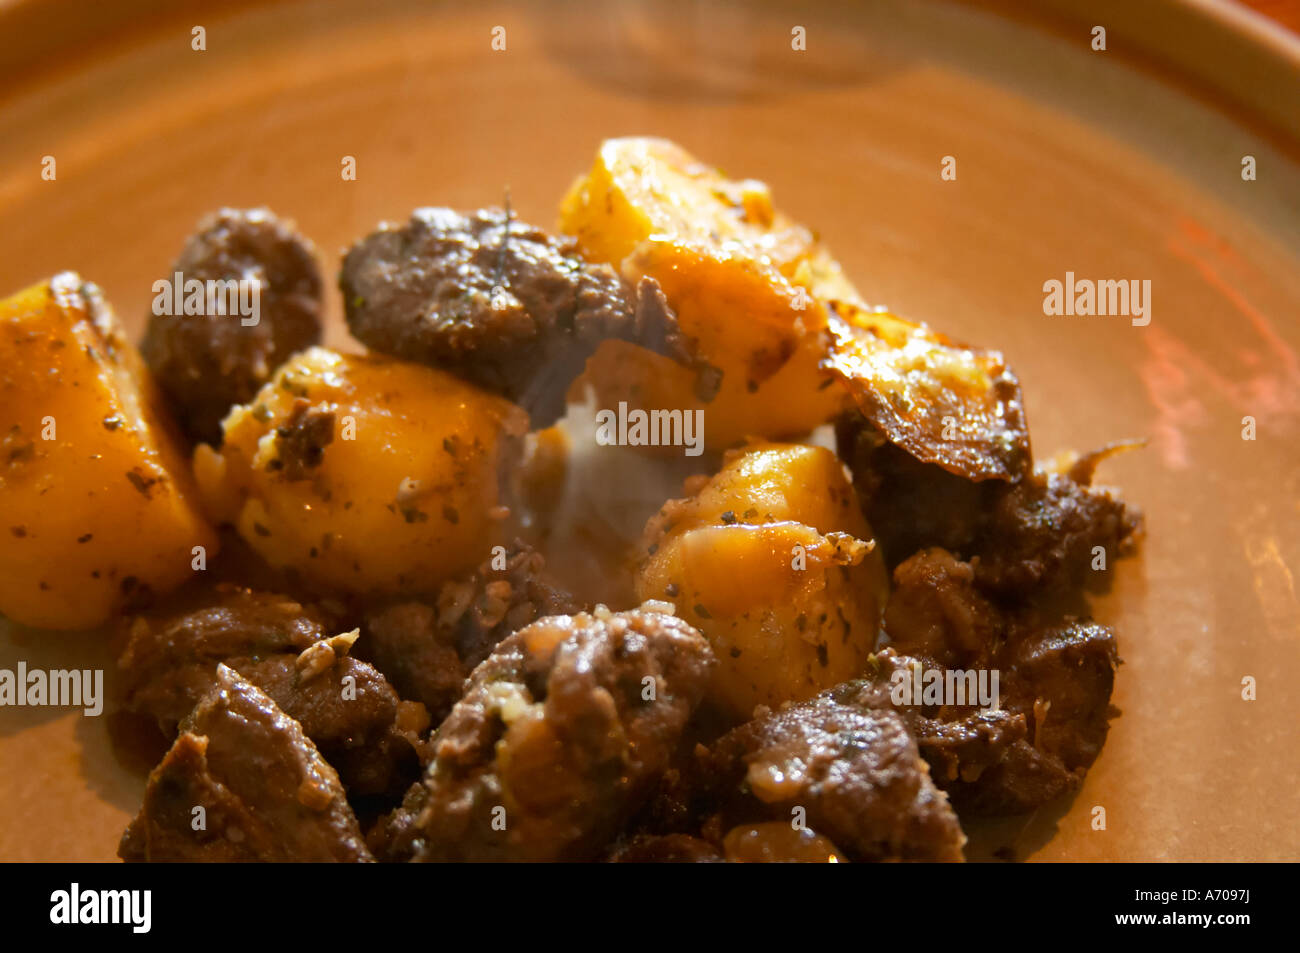 Domaine Piccinini in La Liviniere Minervois. Languedoc. Freginate de sanglier, a local typical stew made from wild boar. With potatoes. France. Europe. Stock Photo